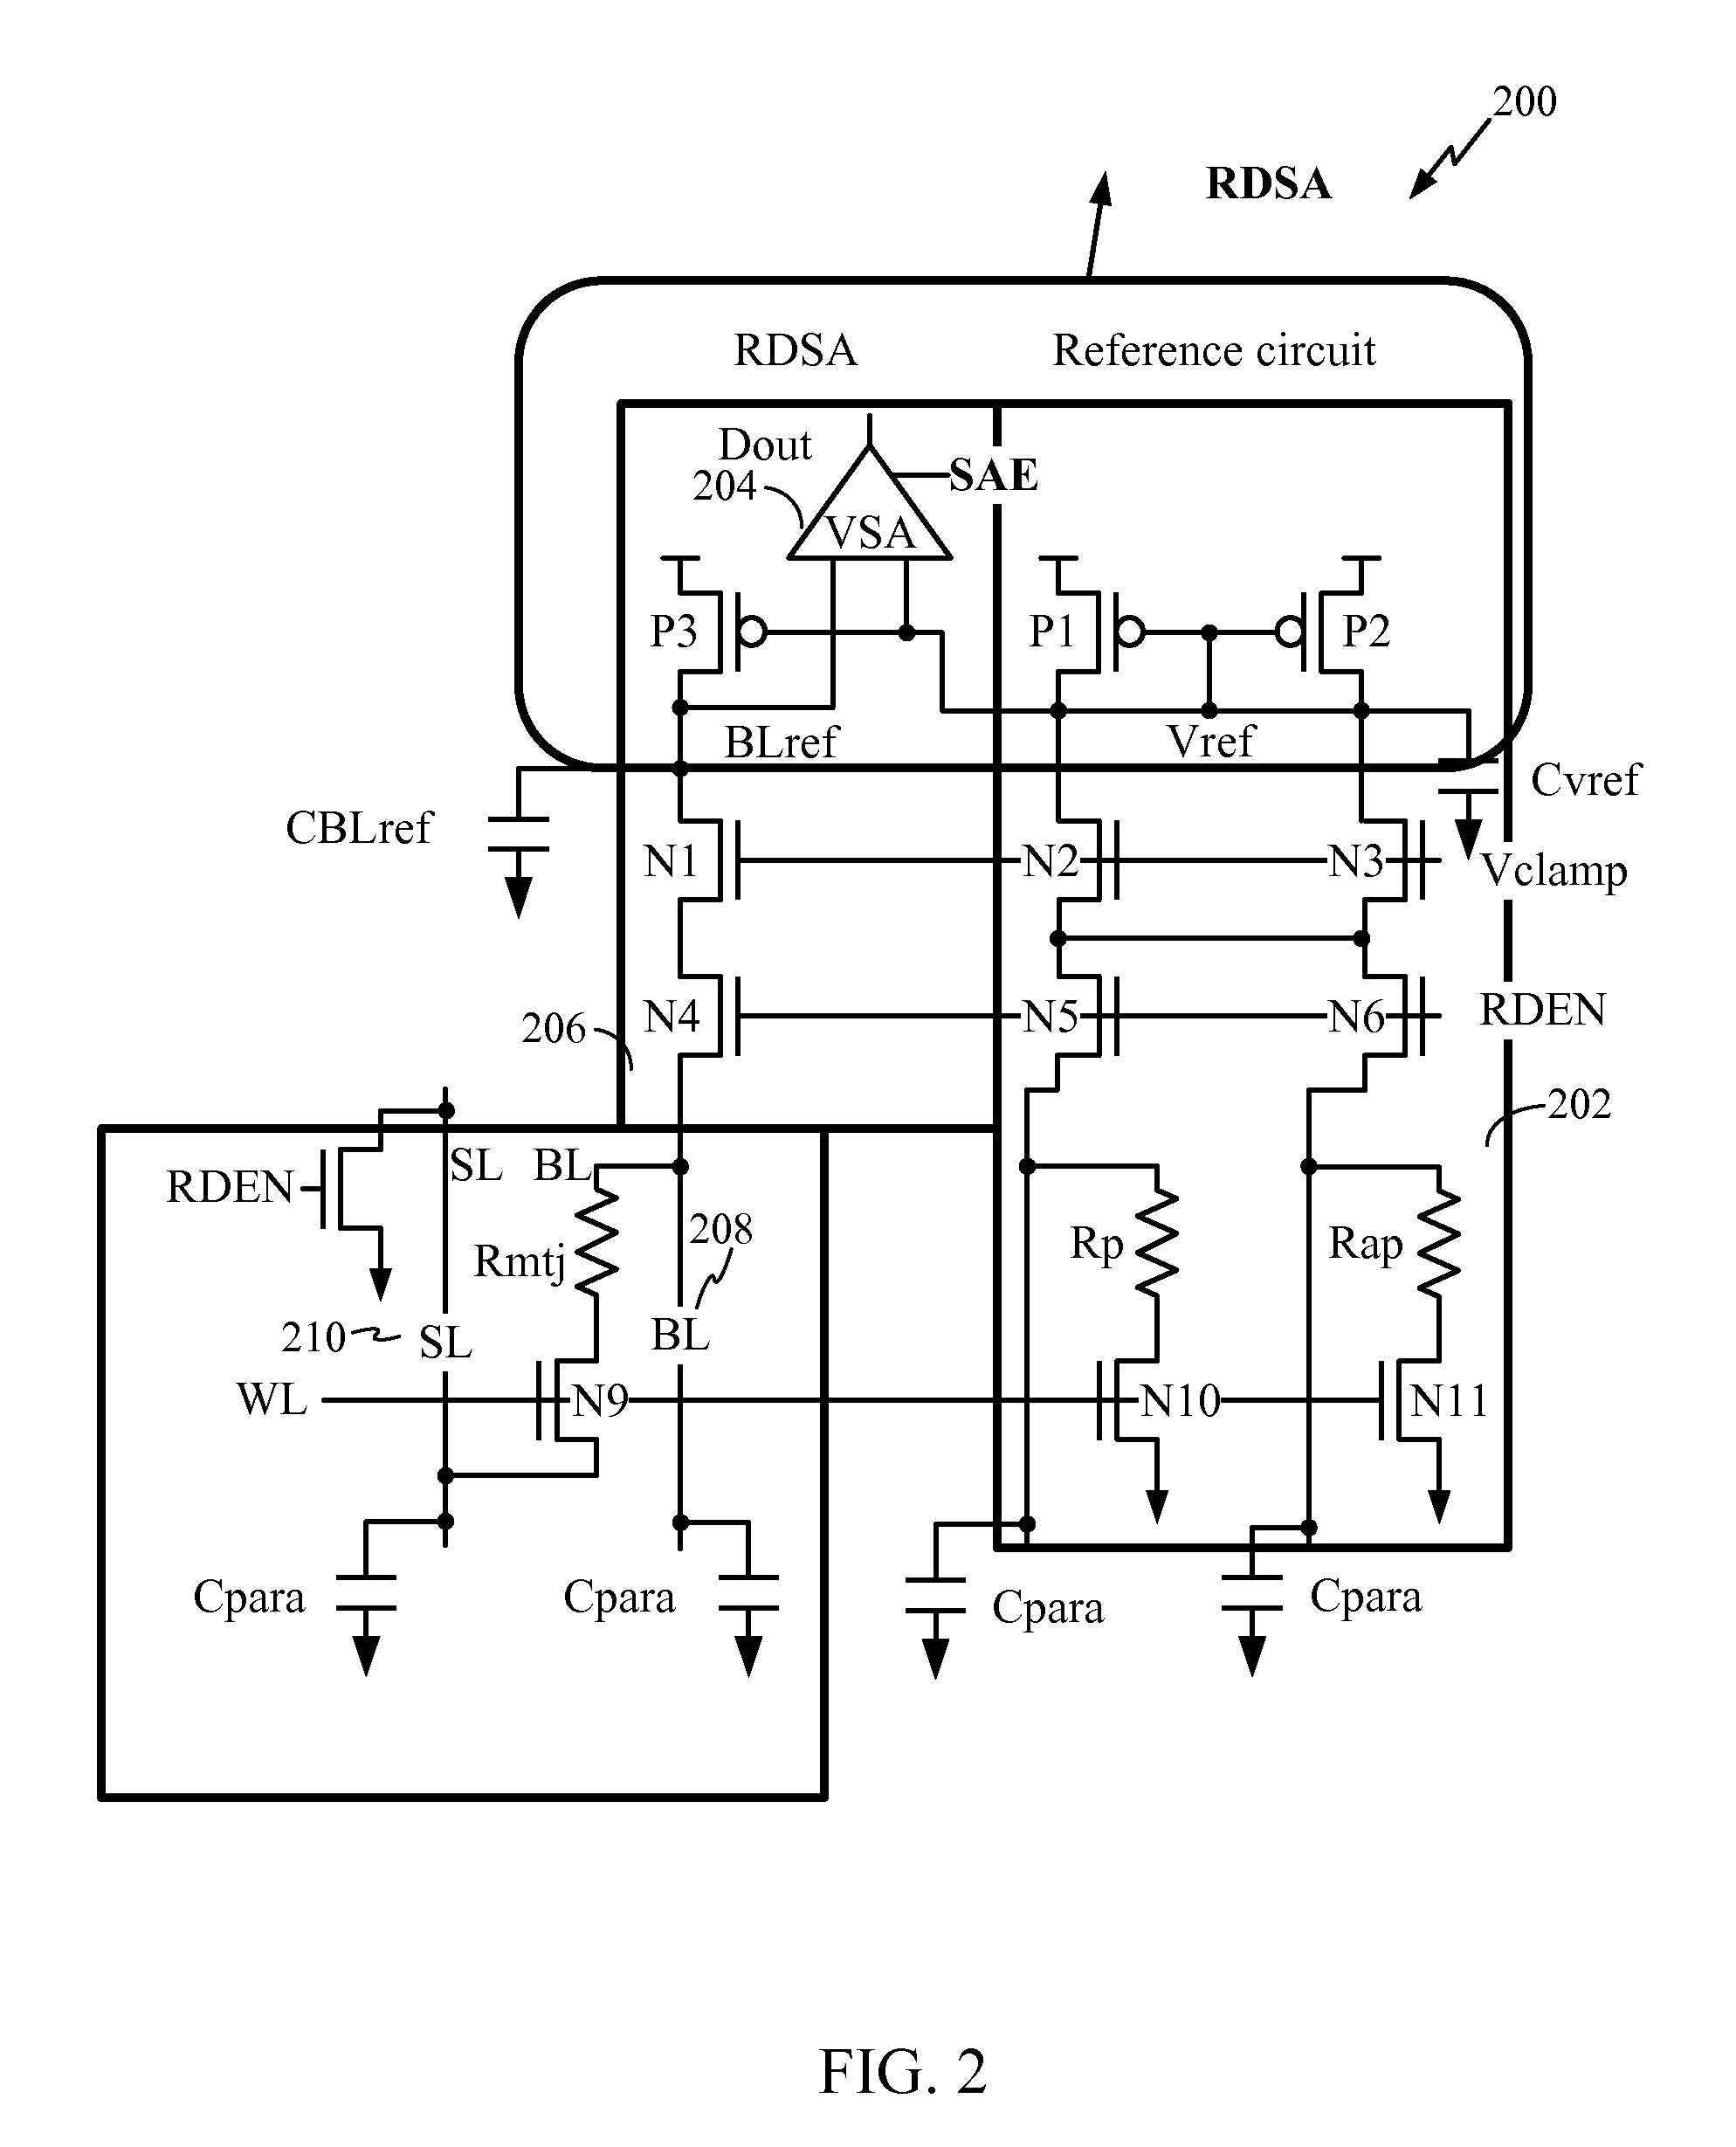 Read sensing circuit and method with equalization timing